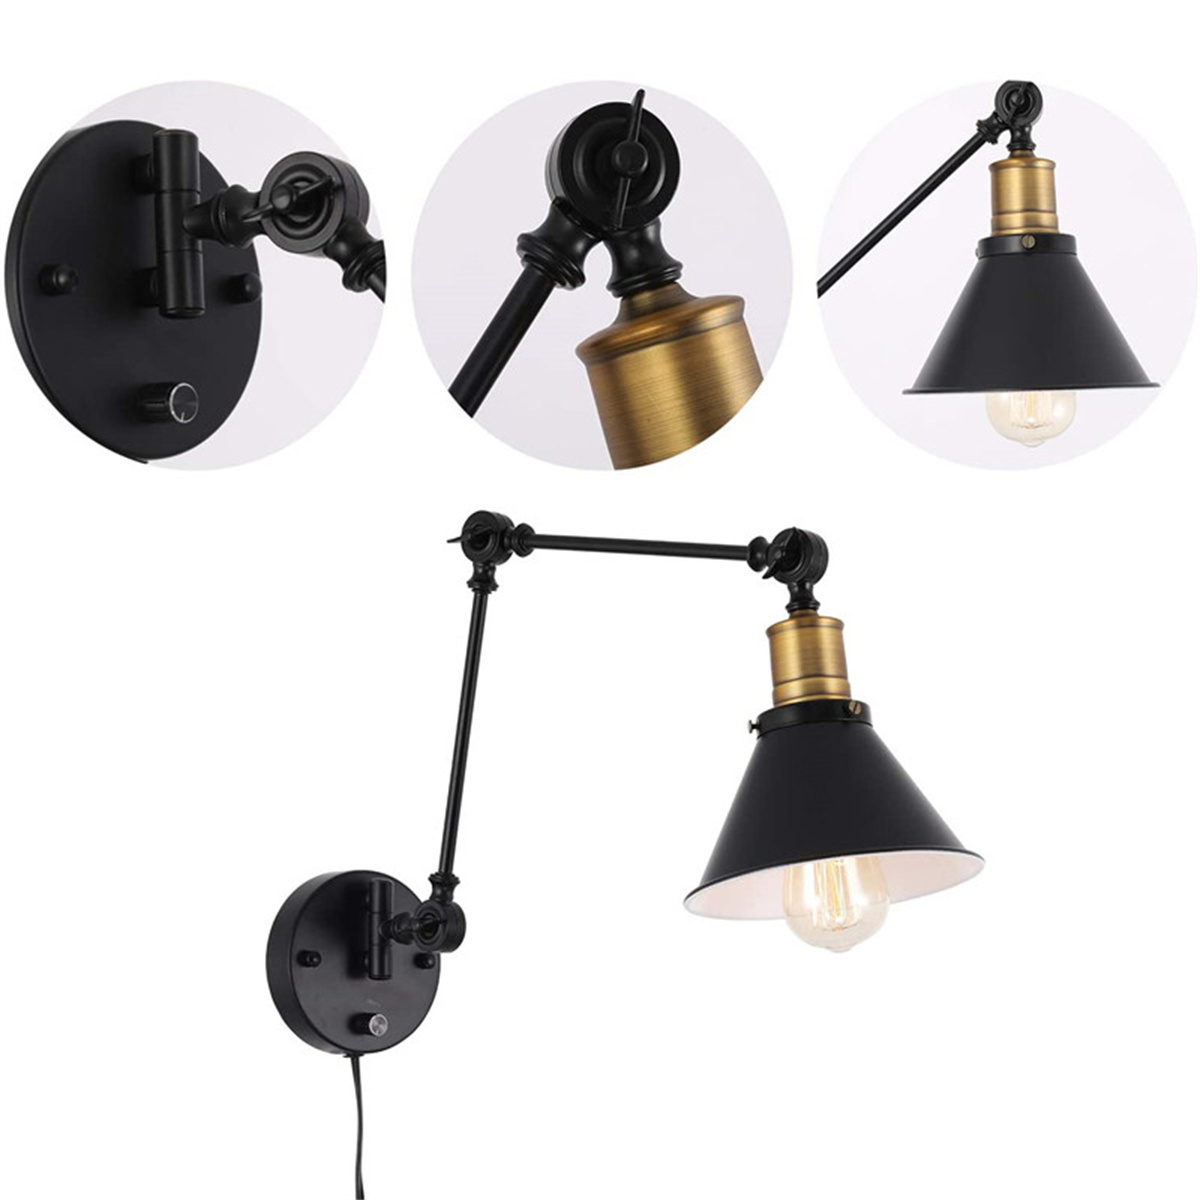 Find 1PCS/2PCS 60W 110V US Plug Industrial Black Sconce Adjustable Swing Arm Angle Vintage Wall Mount Plug in Lamp for Sale on Gipsybee.com with cryptocurrencies